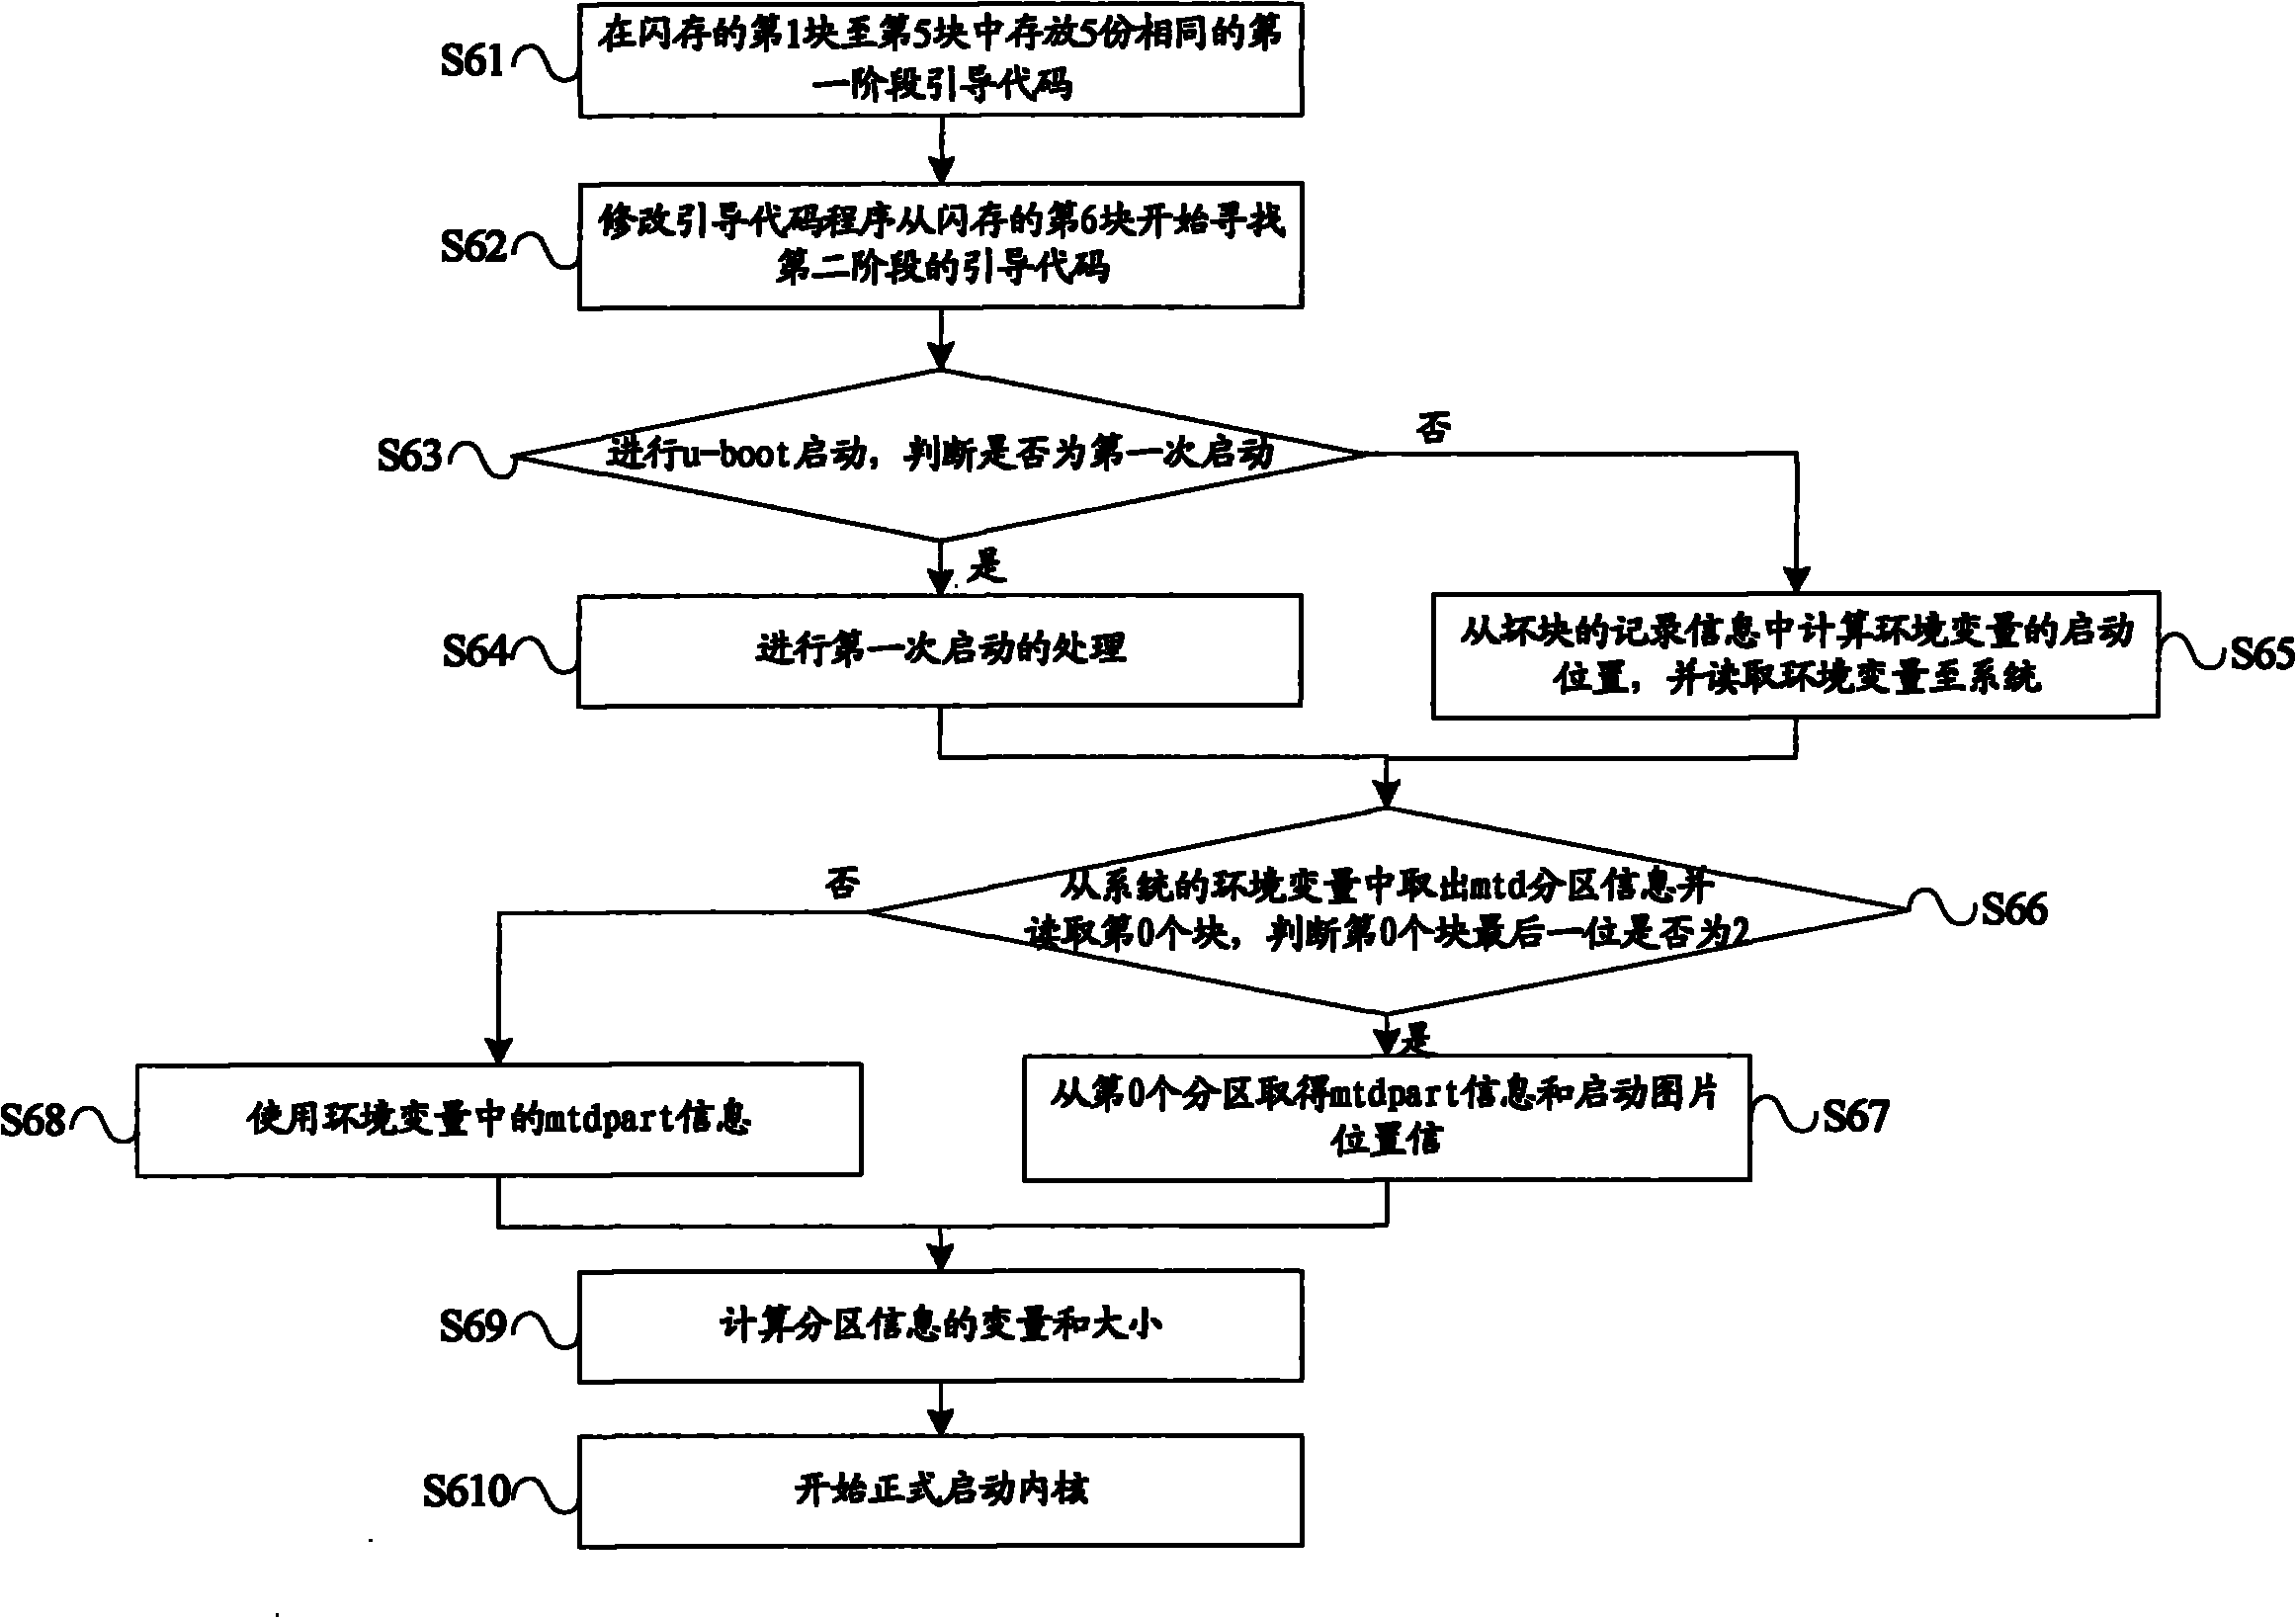 Method for automatically upgrading network television